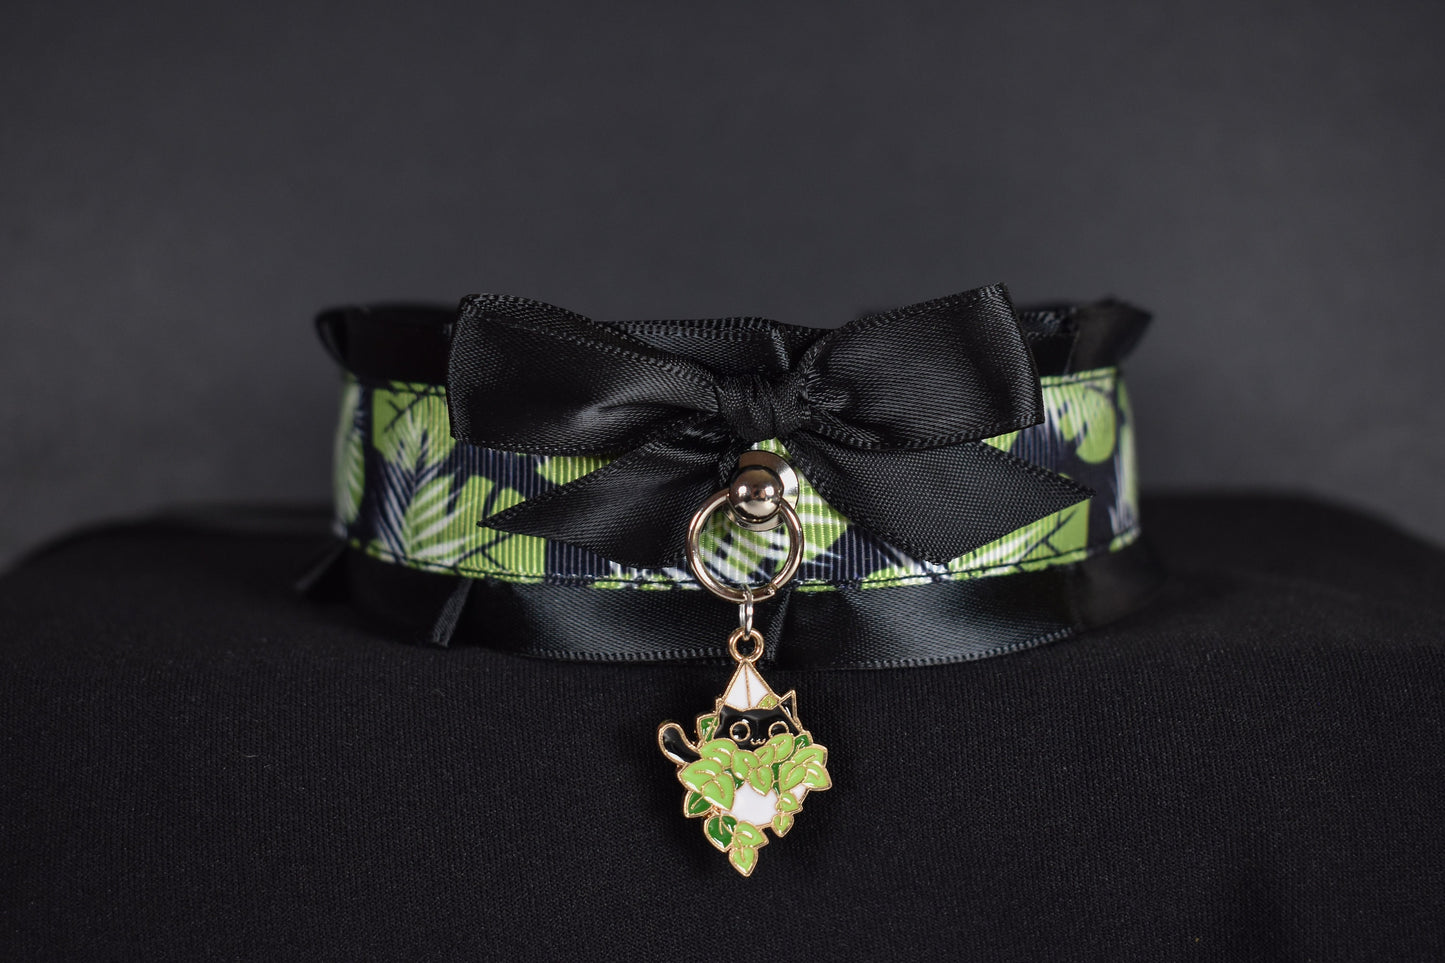 Made to your size / kitty plant choker / kitten play collar / goth / alt fashion / emo / pet play collar / fancy bdsm / DDLG collar